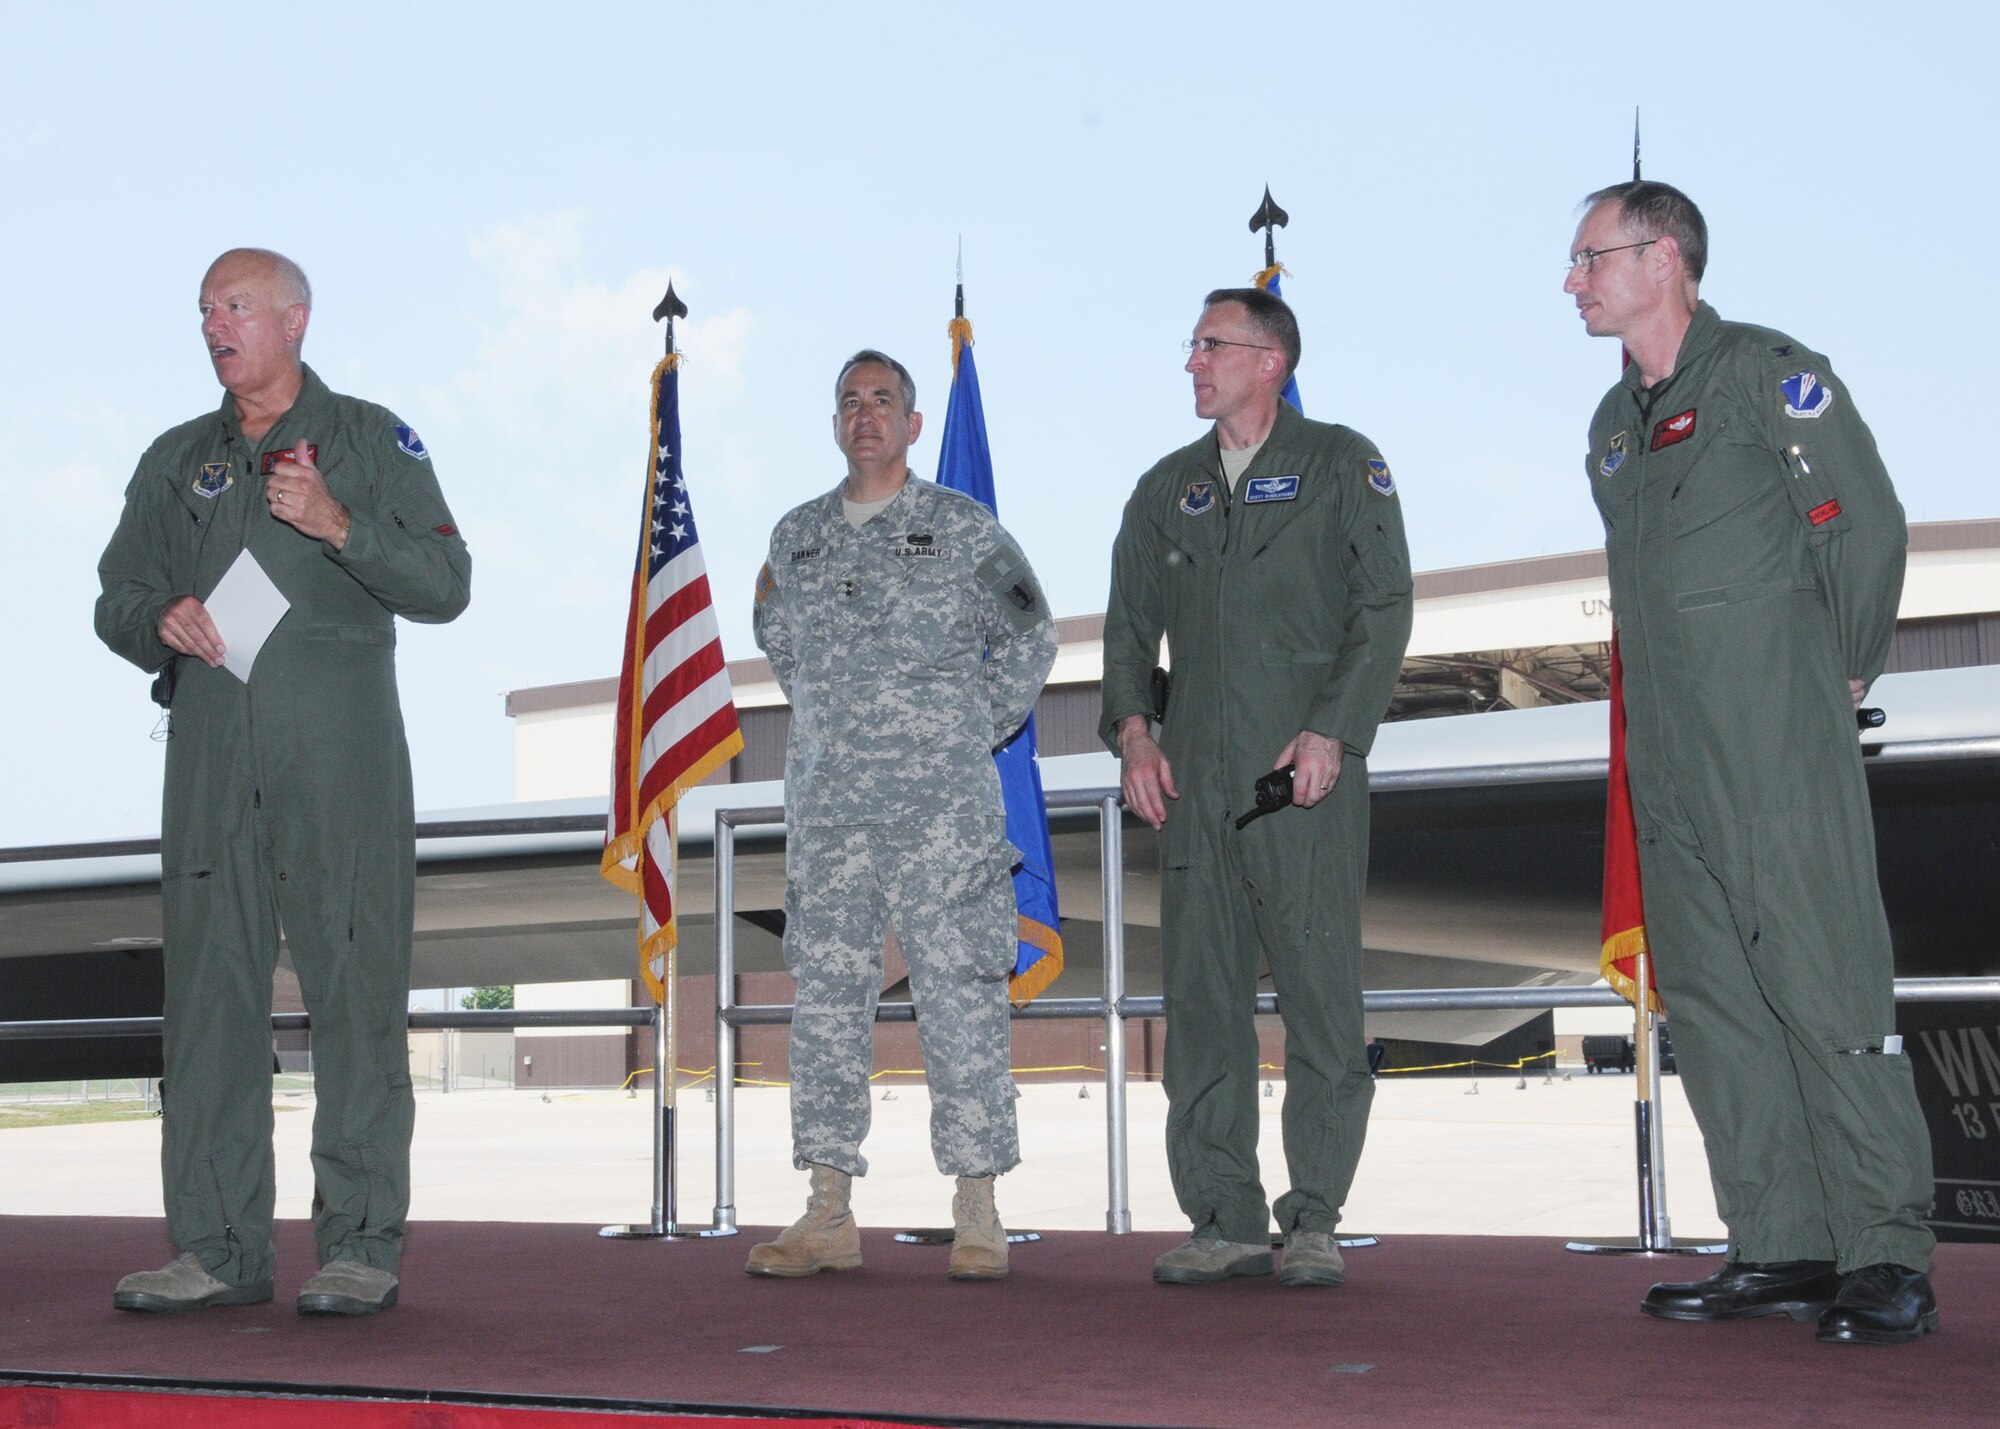 Lt. Gen. Harry M “Bud” Wyatt III, Air National Guard Director, addresses 131st Bomb Wing Missouri Air National Guard personnel at a Wing all call, June 4, to celebrate the unveiling of the 131st wing patch onto the B-2 “Spirit of Missouri. “   Left to right:  Wyatt, Maj. Gen. Stephen Danner, Adjutant General for the Missouri National Guard, Brig Gen. Scott Vander Hamm, 509th Bomb Wing commander, Col. Greg Champagne, 131st Bomb Wing commander.  (U.S. Air Force photo by Master Sgt. Mary-Dale Amison)